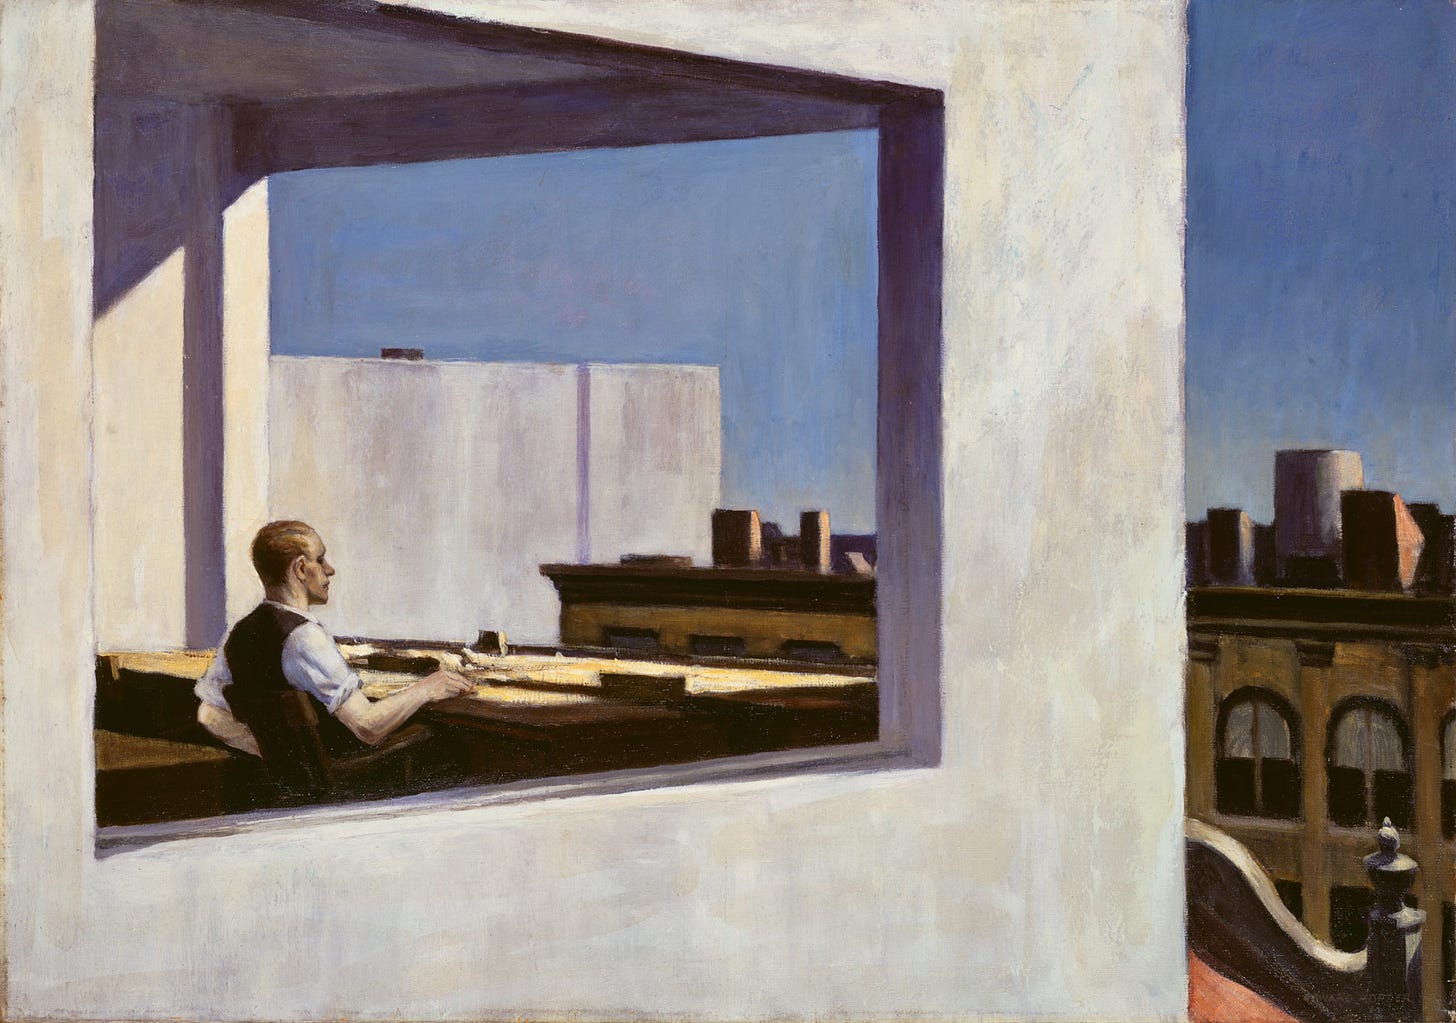 Office in a Small City [Edward Hopper] | Sartle - Rogue Art History